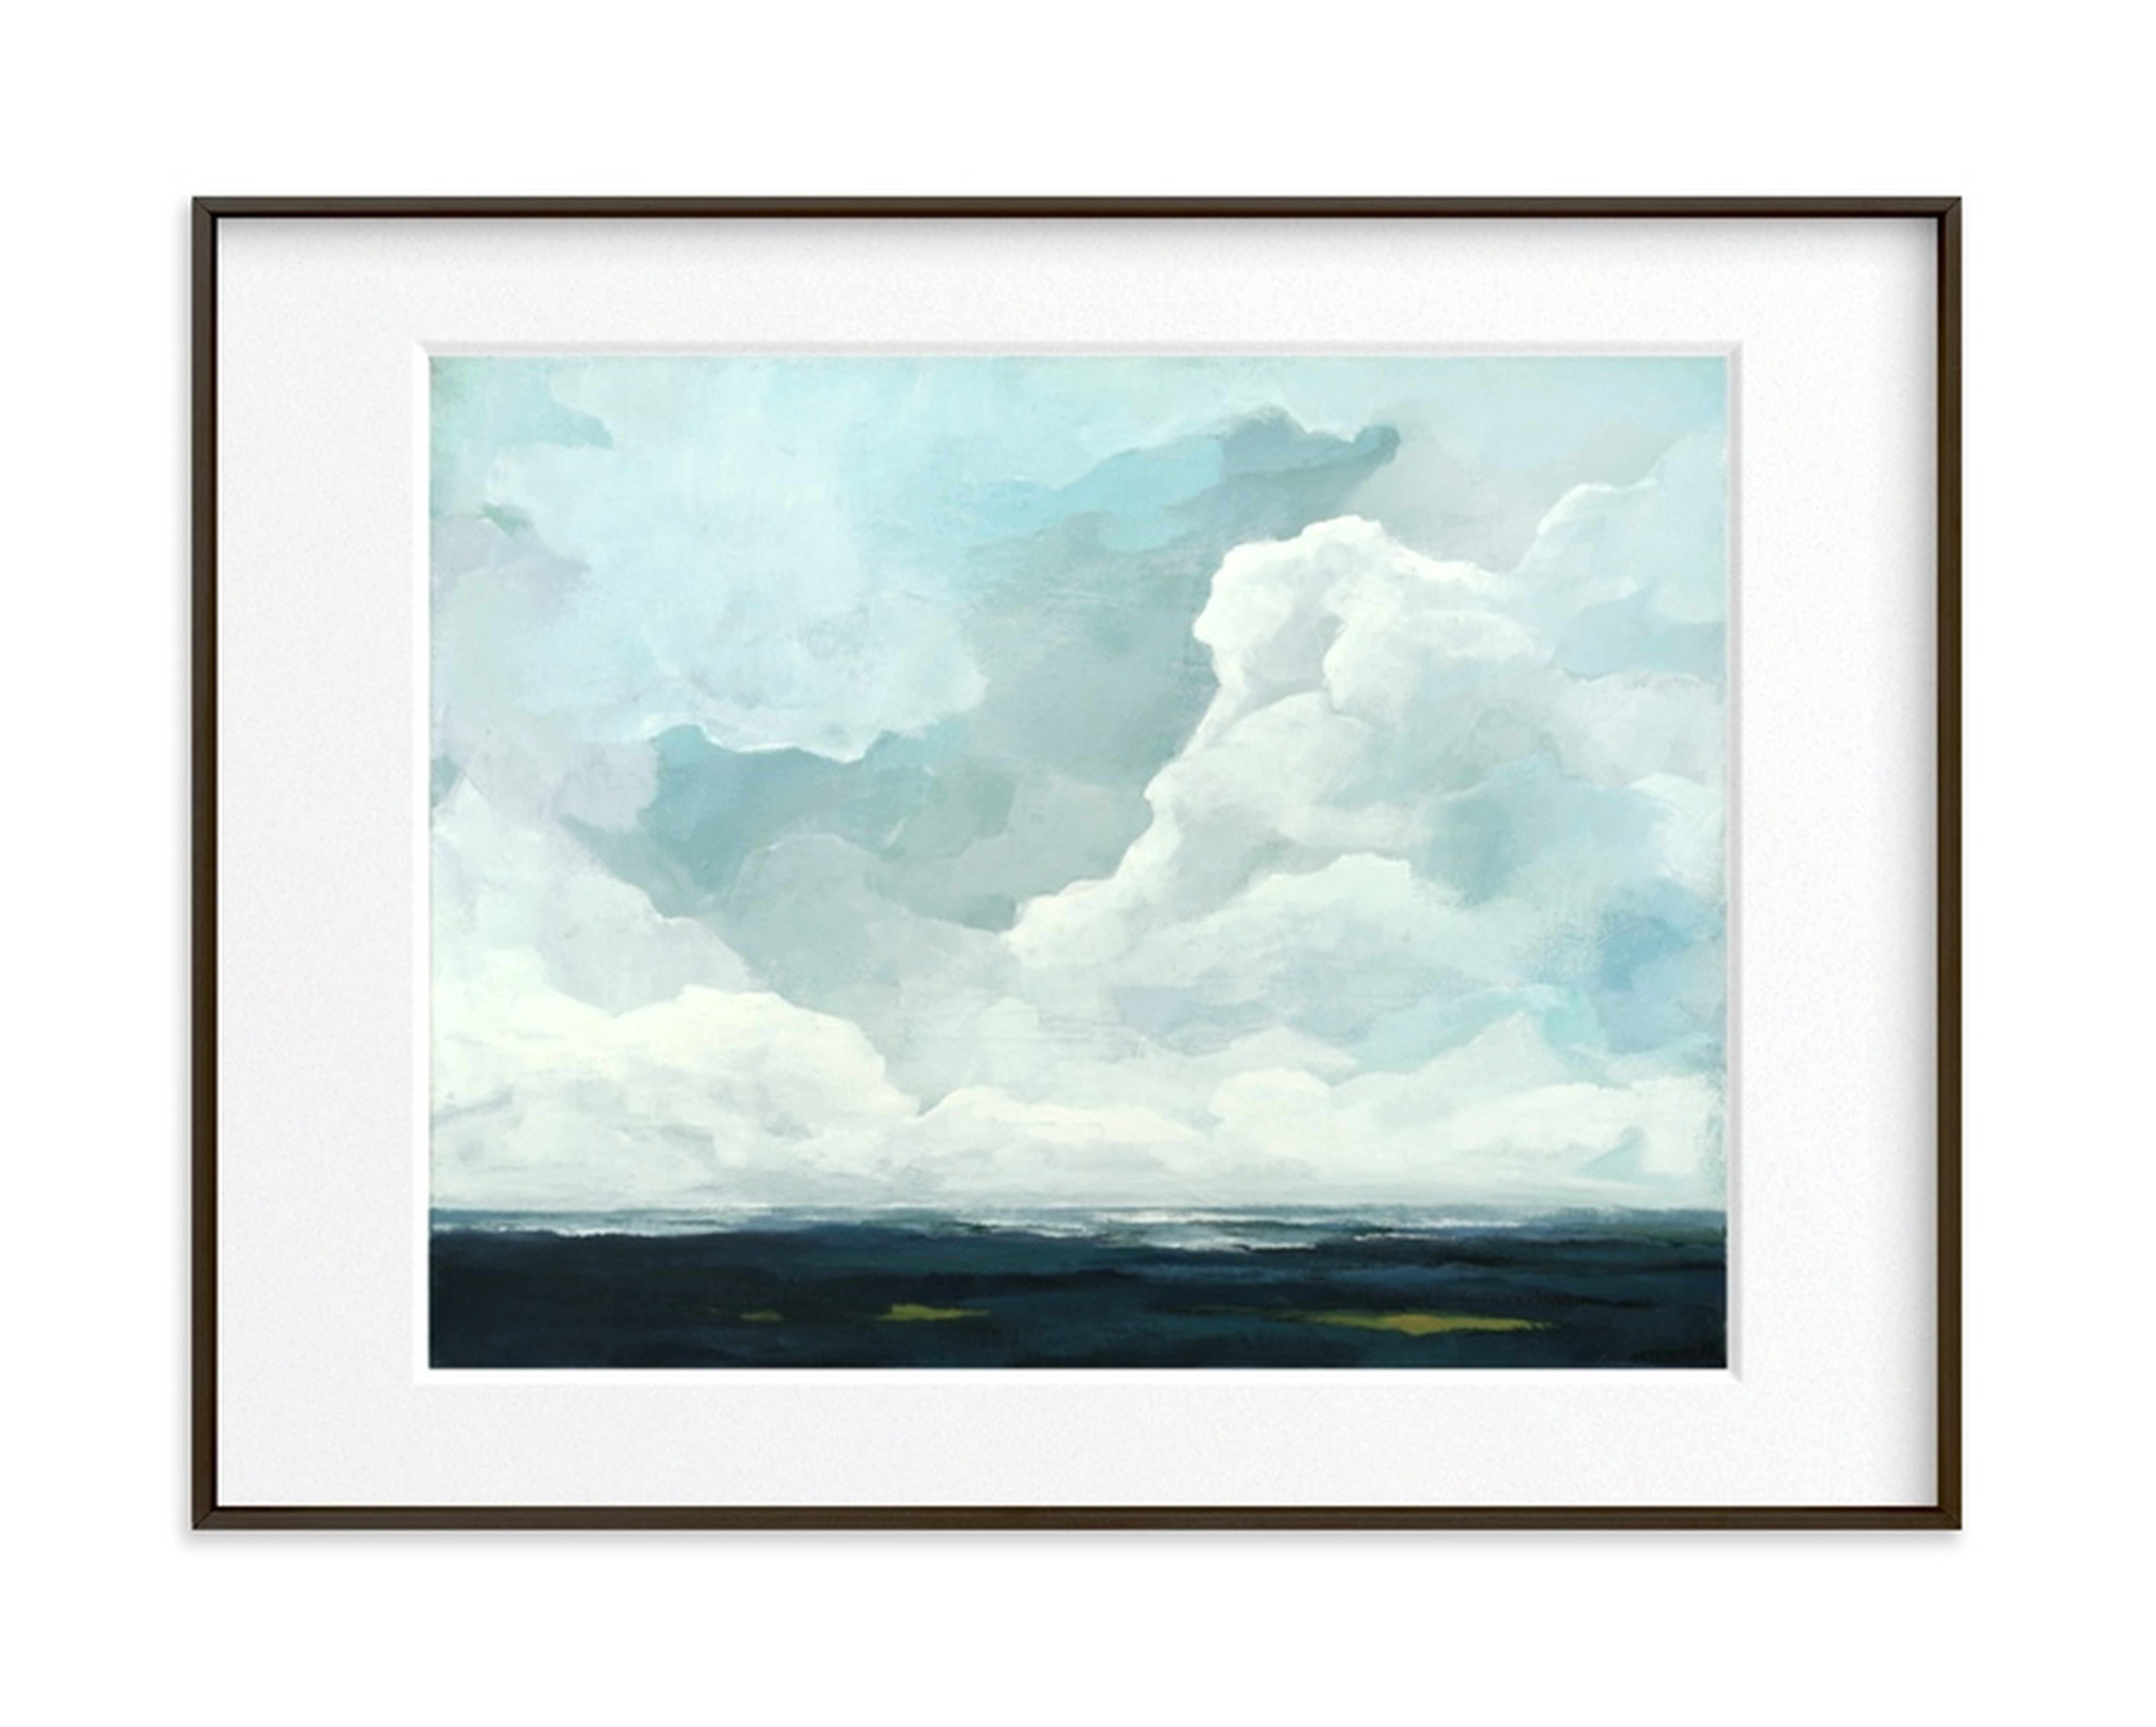 Late in the Day - 24" x 18" - Matte Black Frame - Matted - Minted